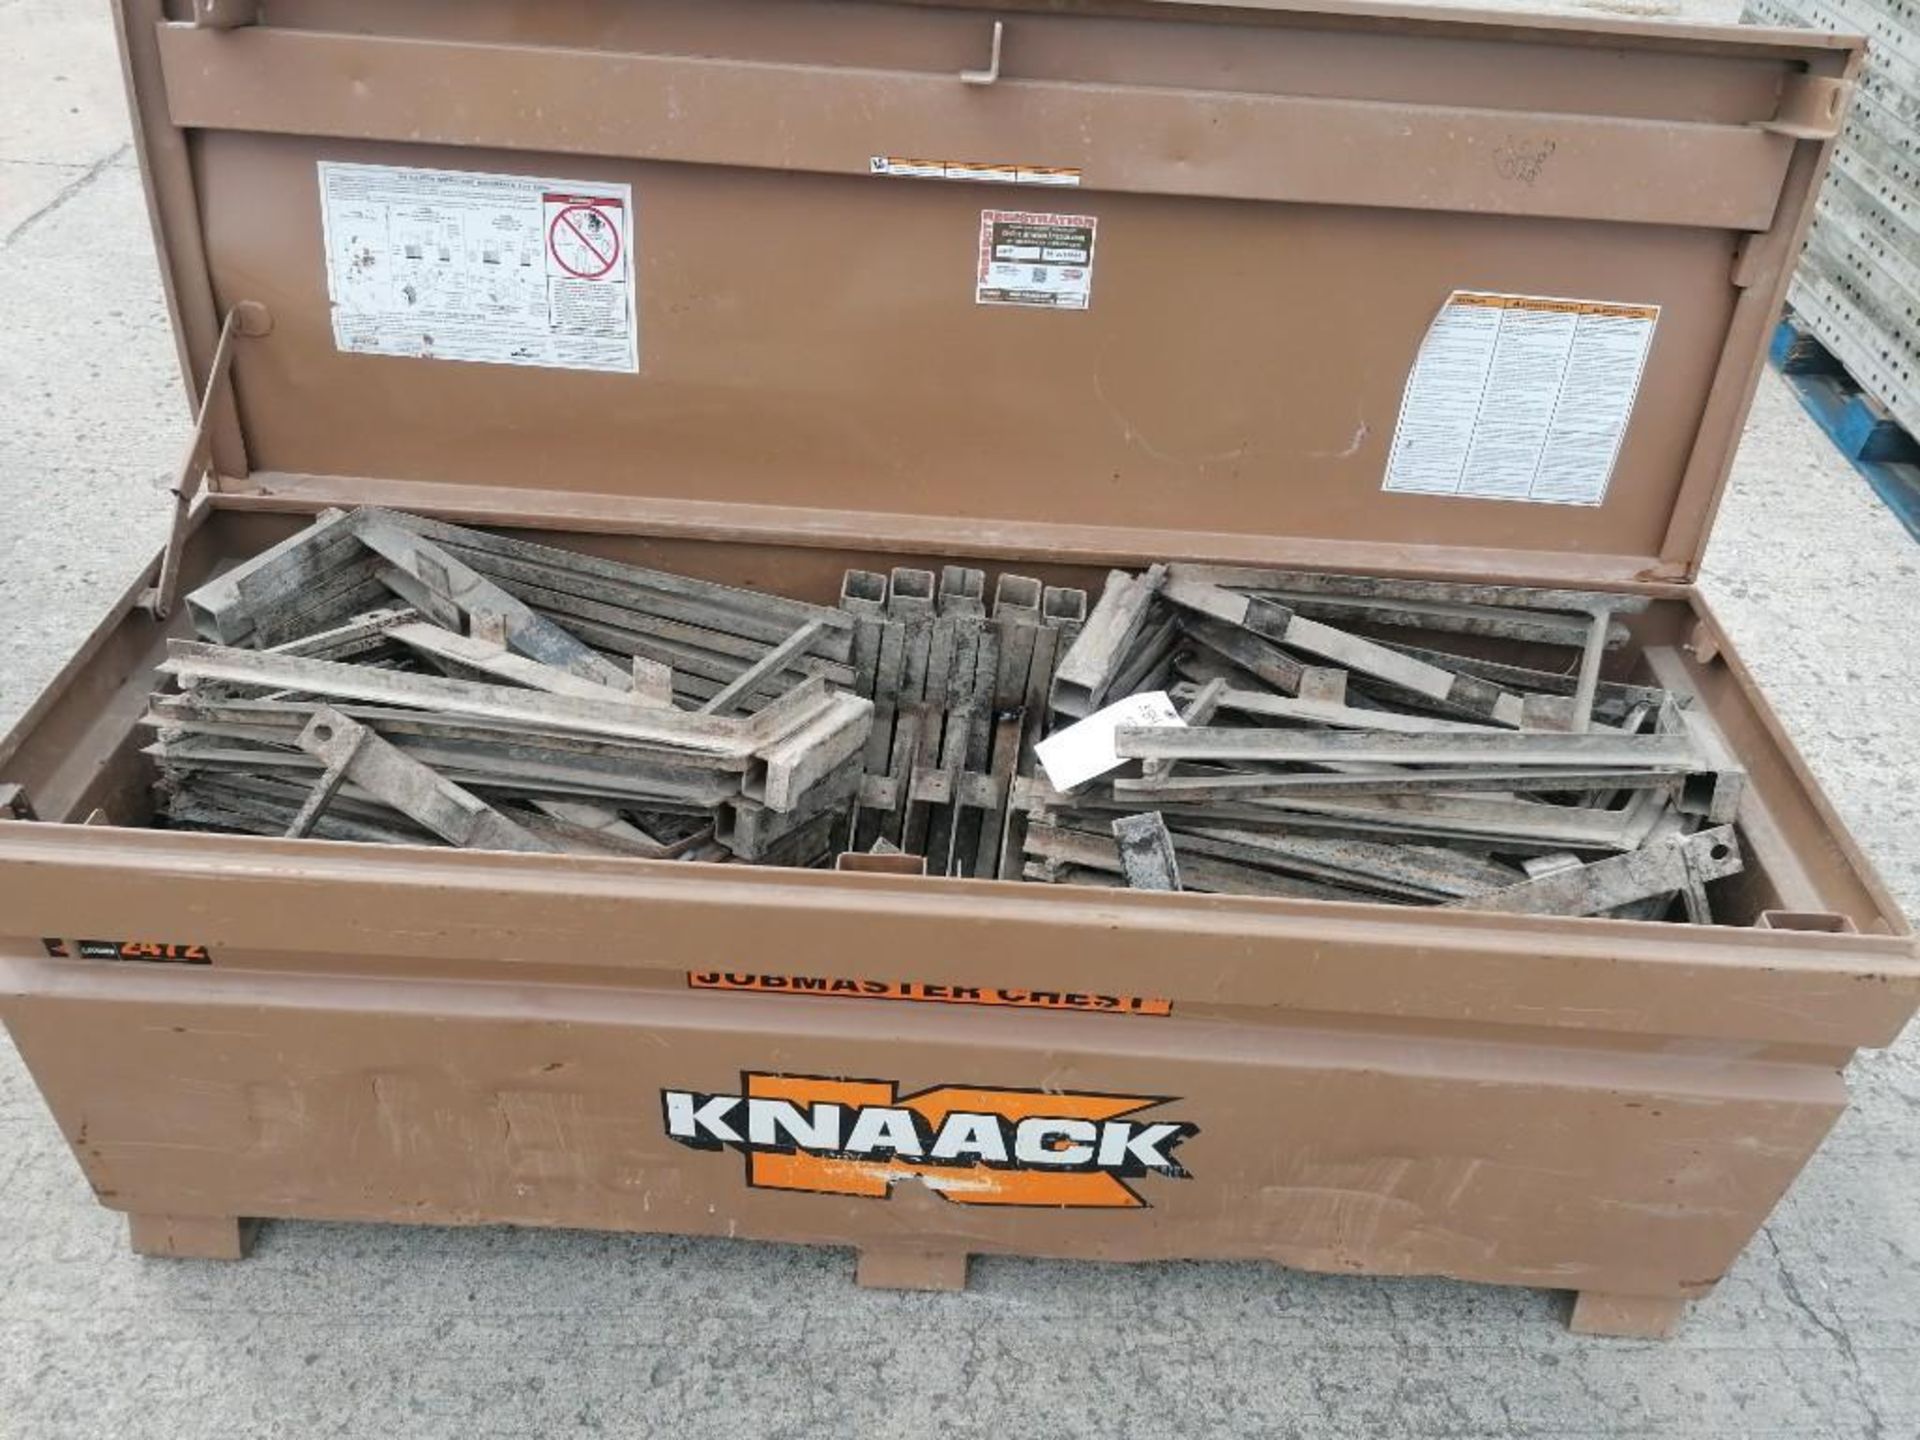 KNAACK Job Box Model 2472 with (58) Scaffolding Brackets. Located at 301 E Henry Street, Mt. - Image 3 of 4